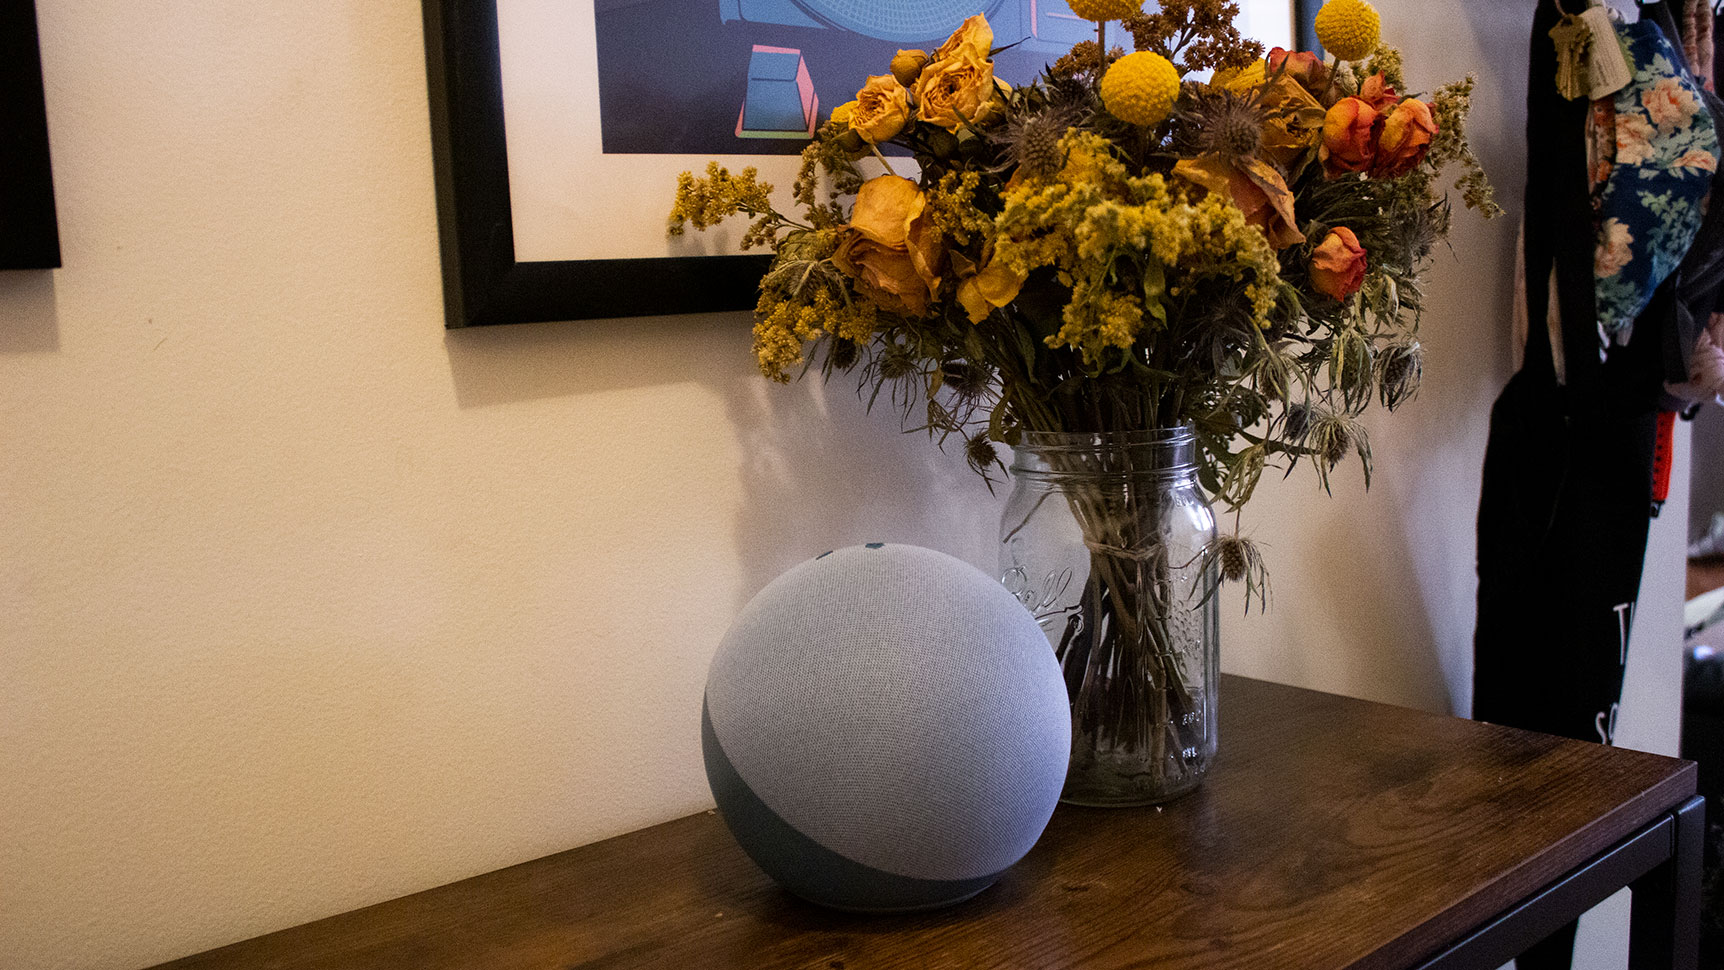 It looks nicer in terms of decor, at the very least. (Photo: Victoria Song/Gizmodo)